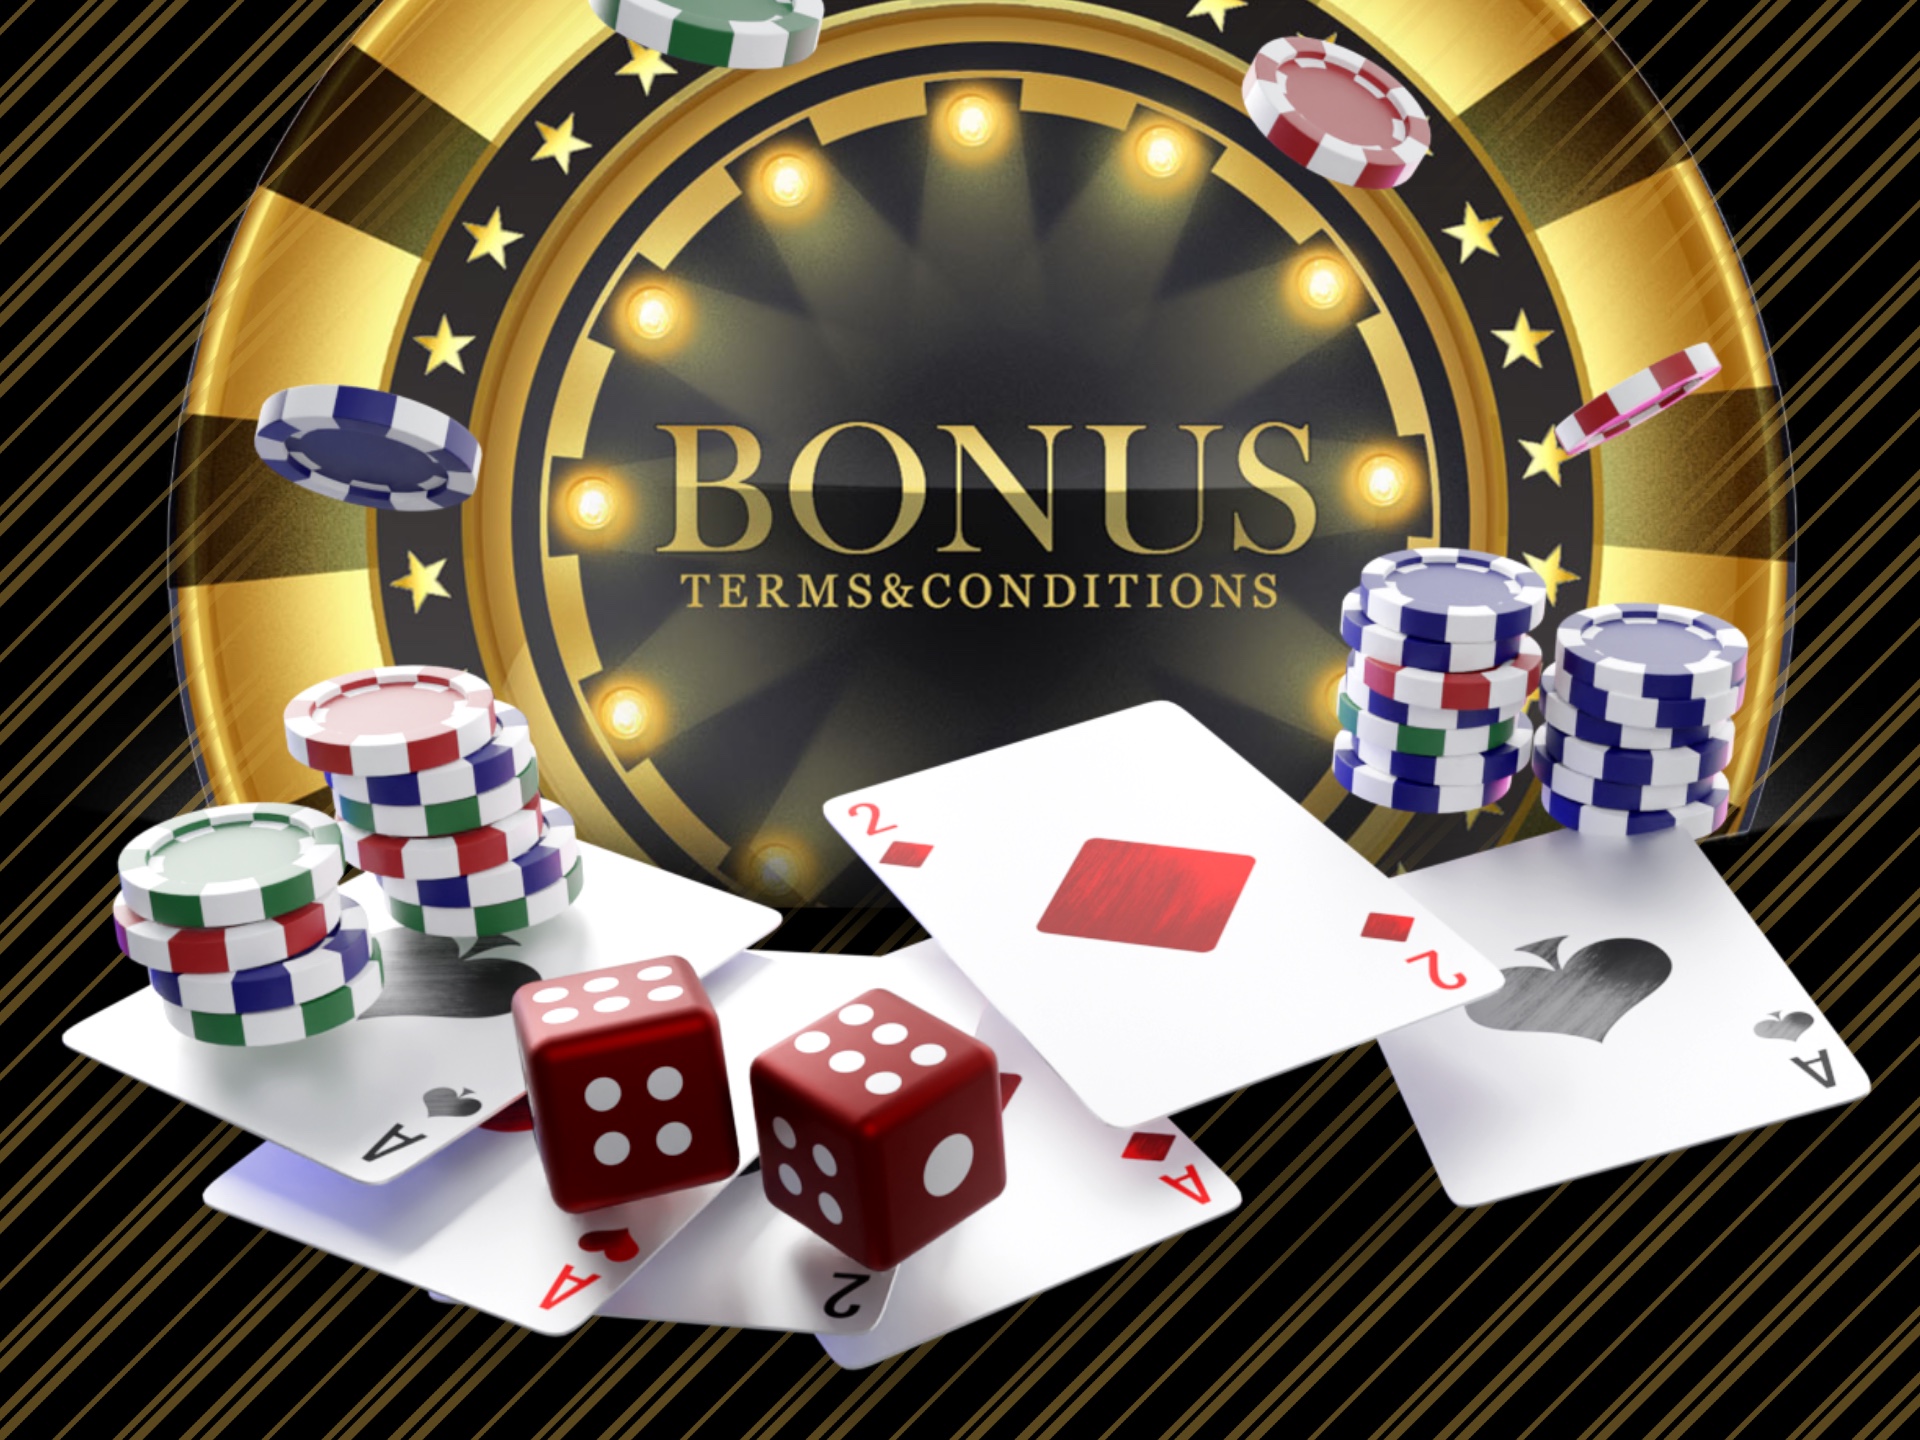 YOu should get to know all the terms and conditions before receiving an online casino bonus.